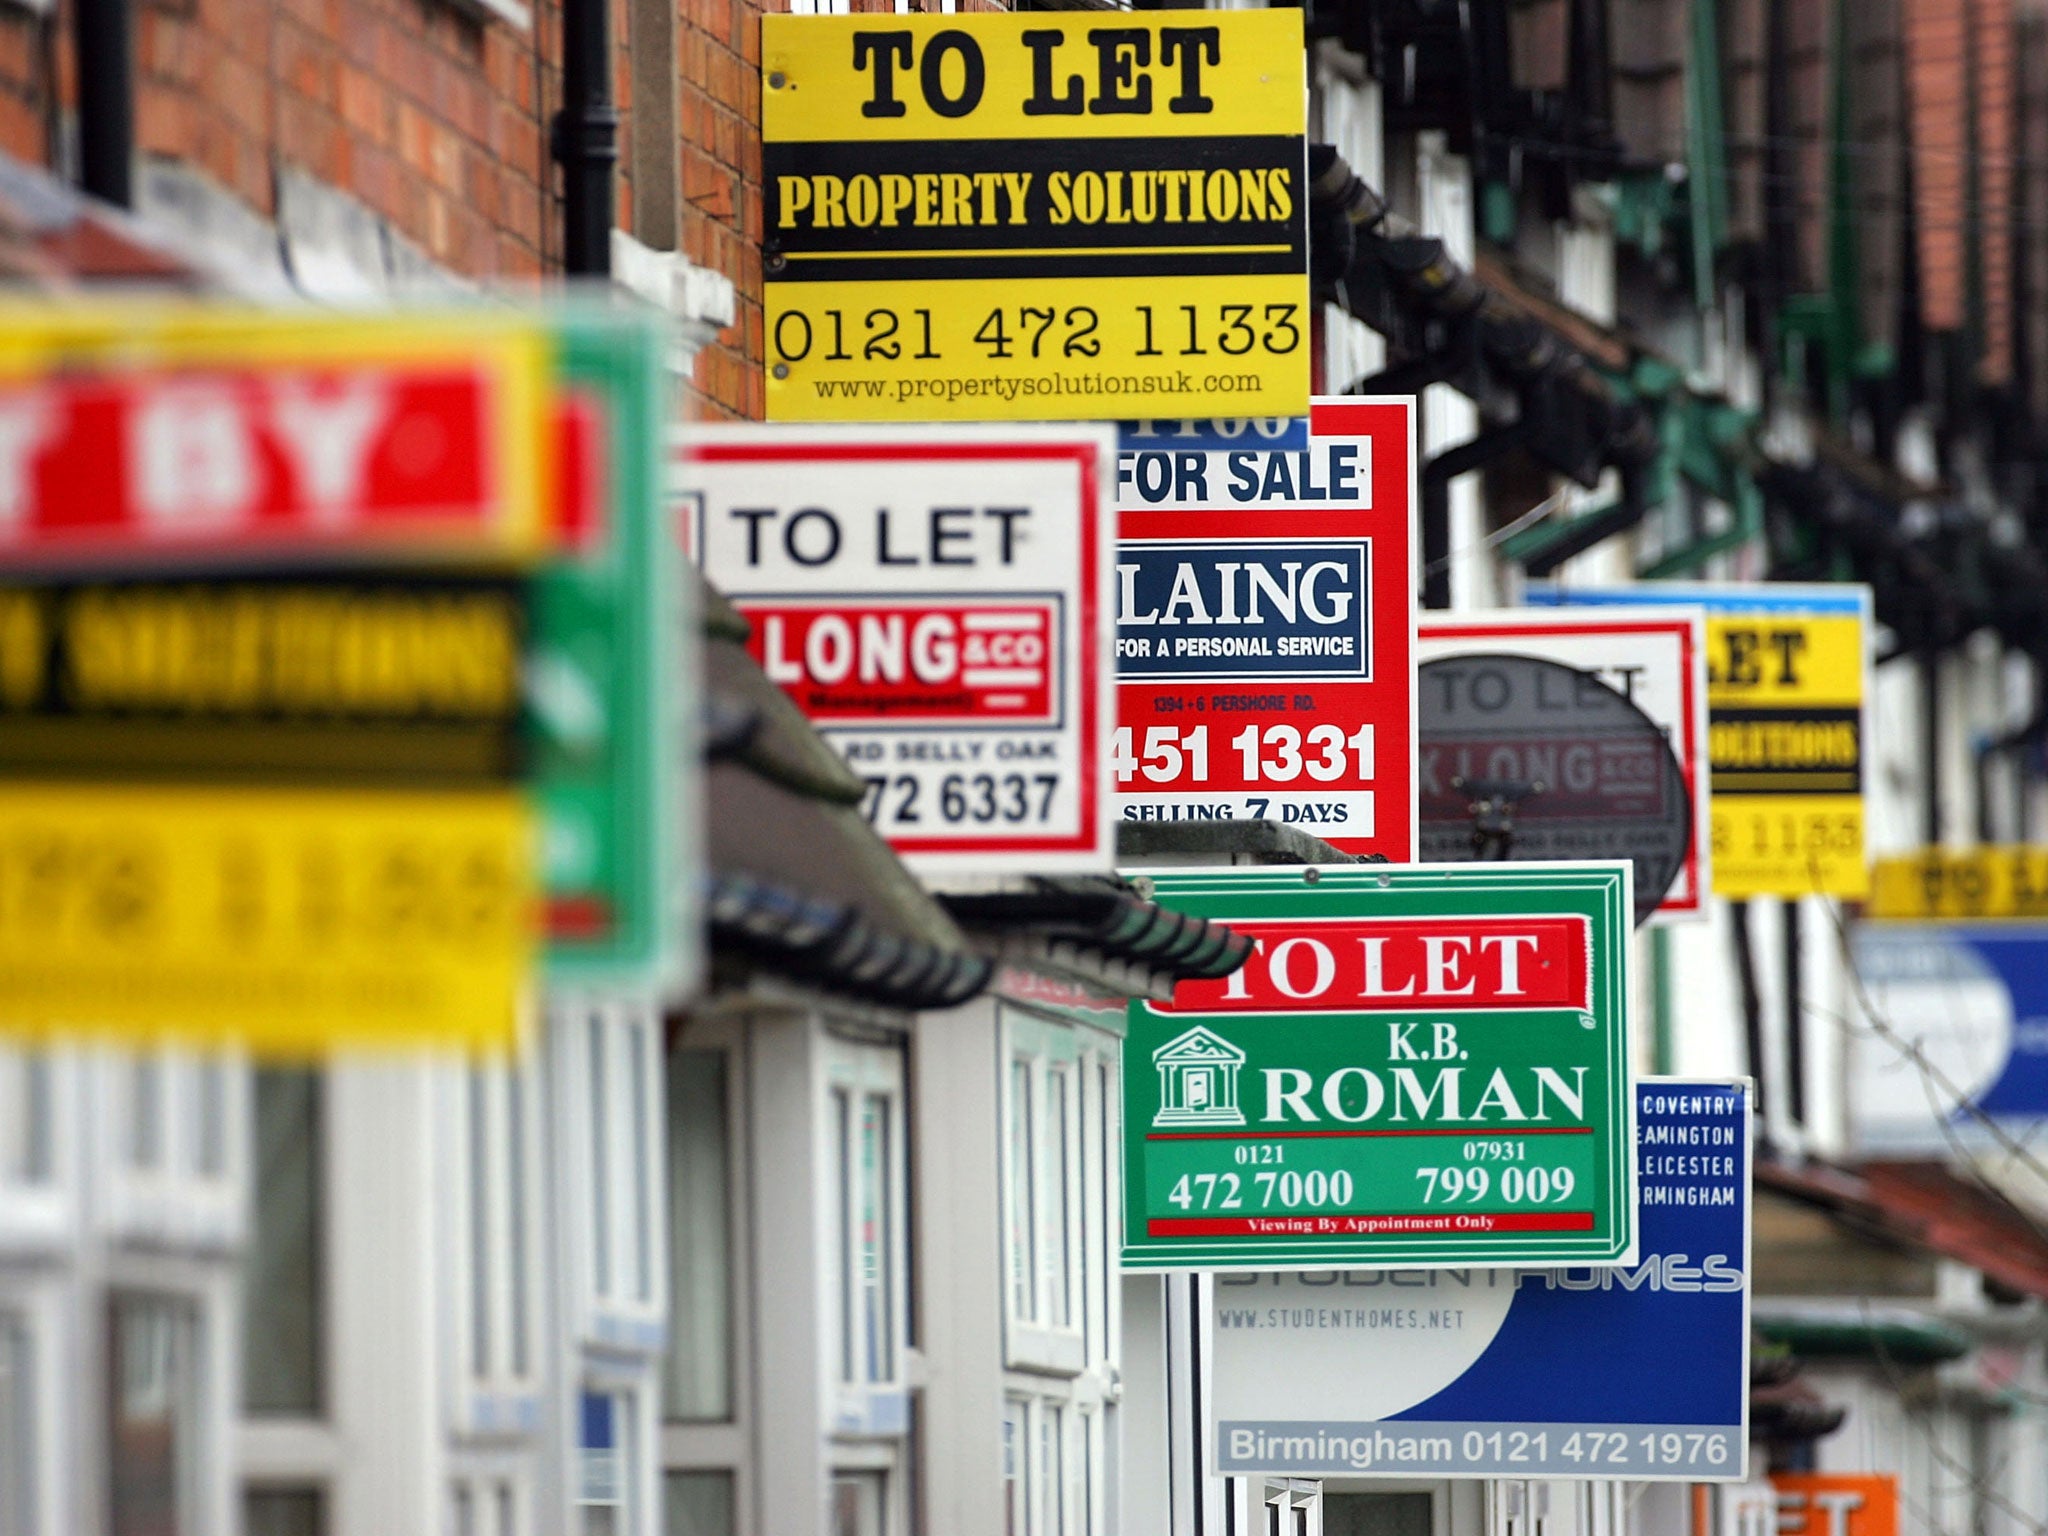 House prices rose by 0.4 per cent in August